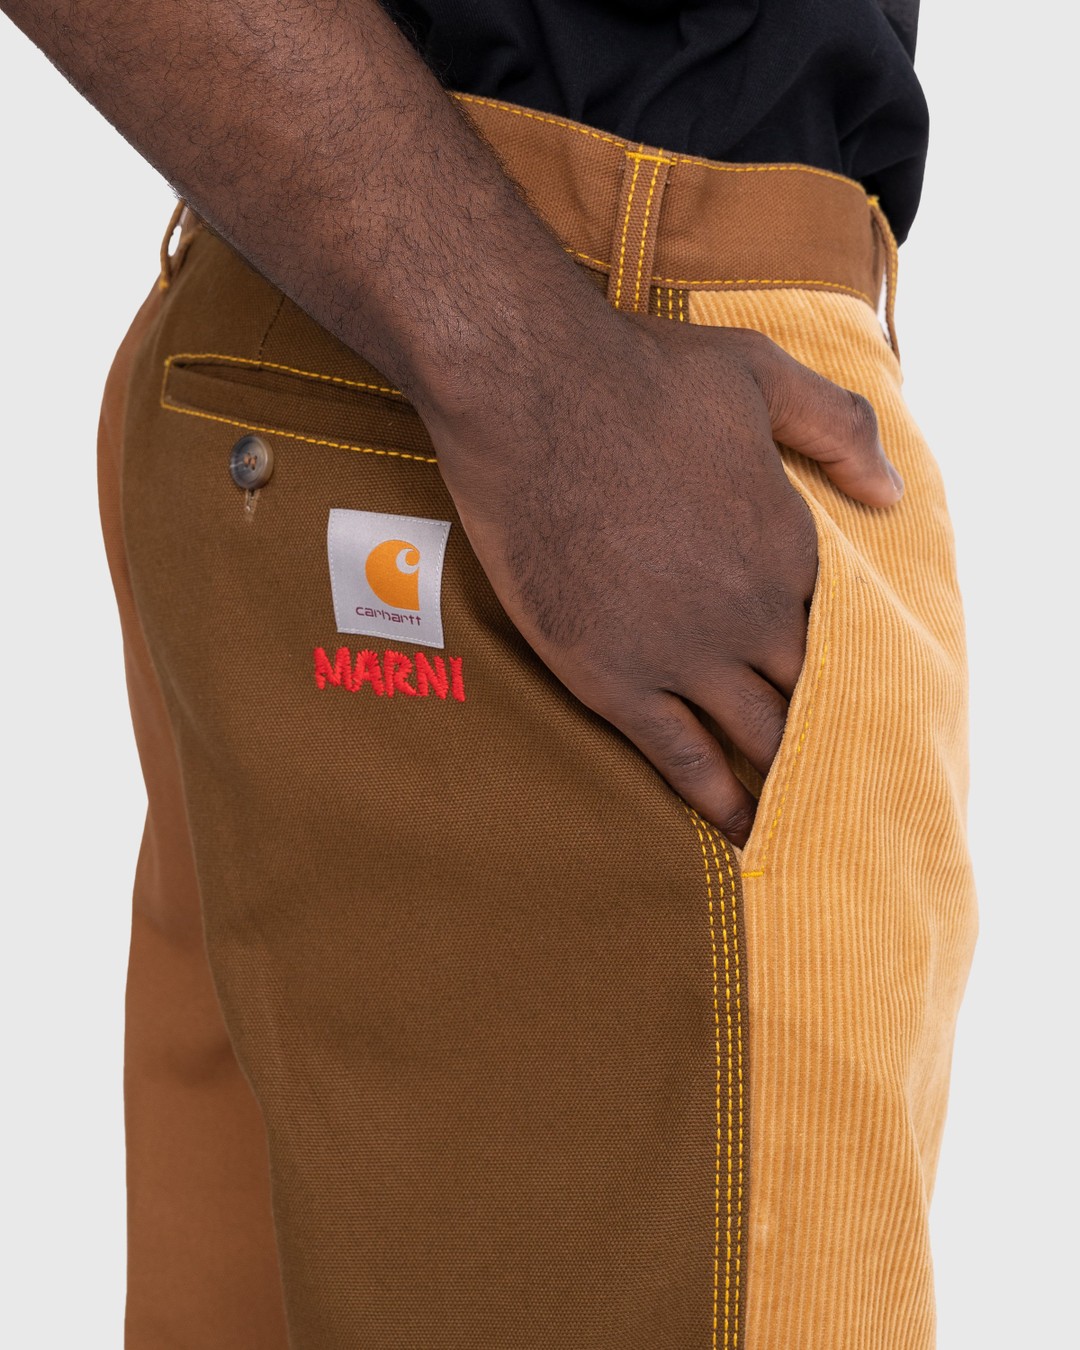 Marni x Carhartt WIP – Colorblocked Trousers Brown - Trousers - Brown - Image 5